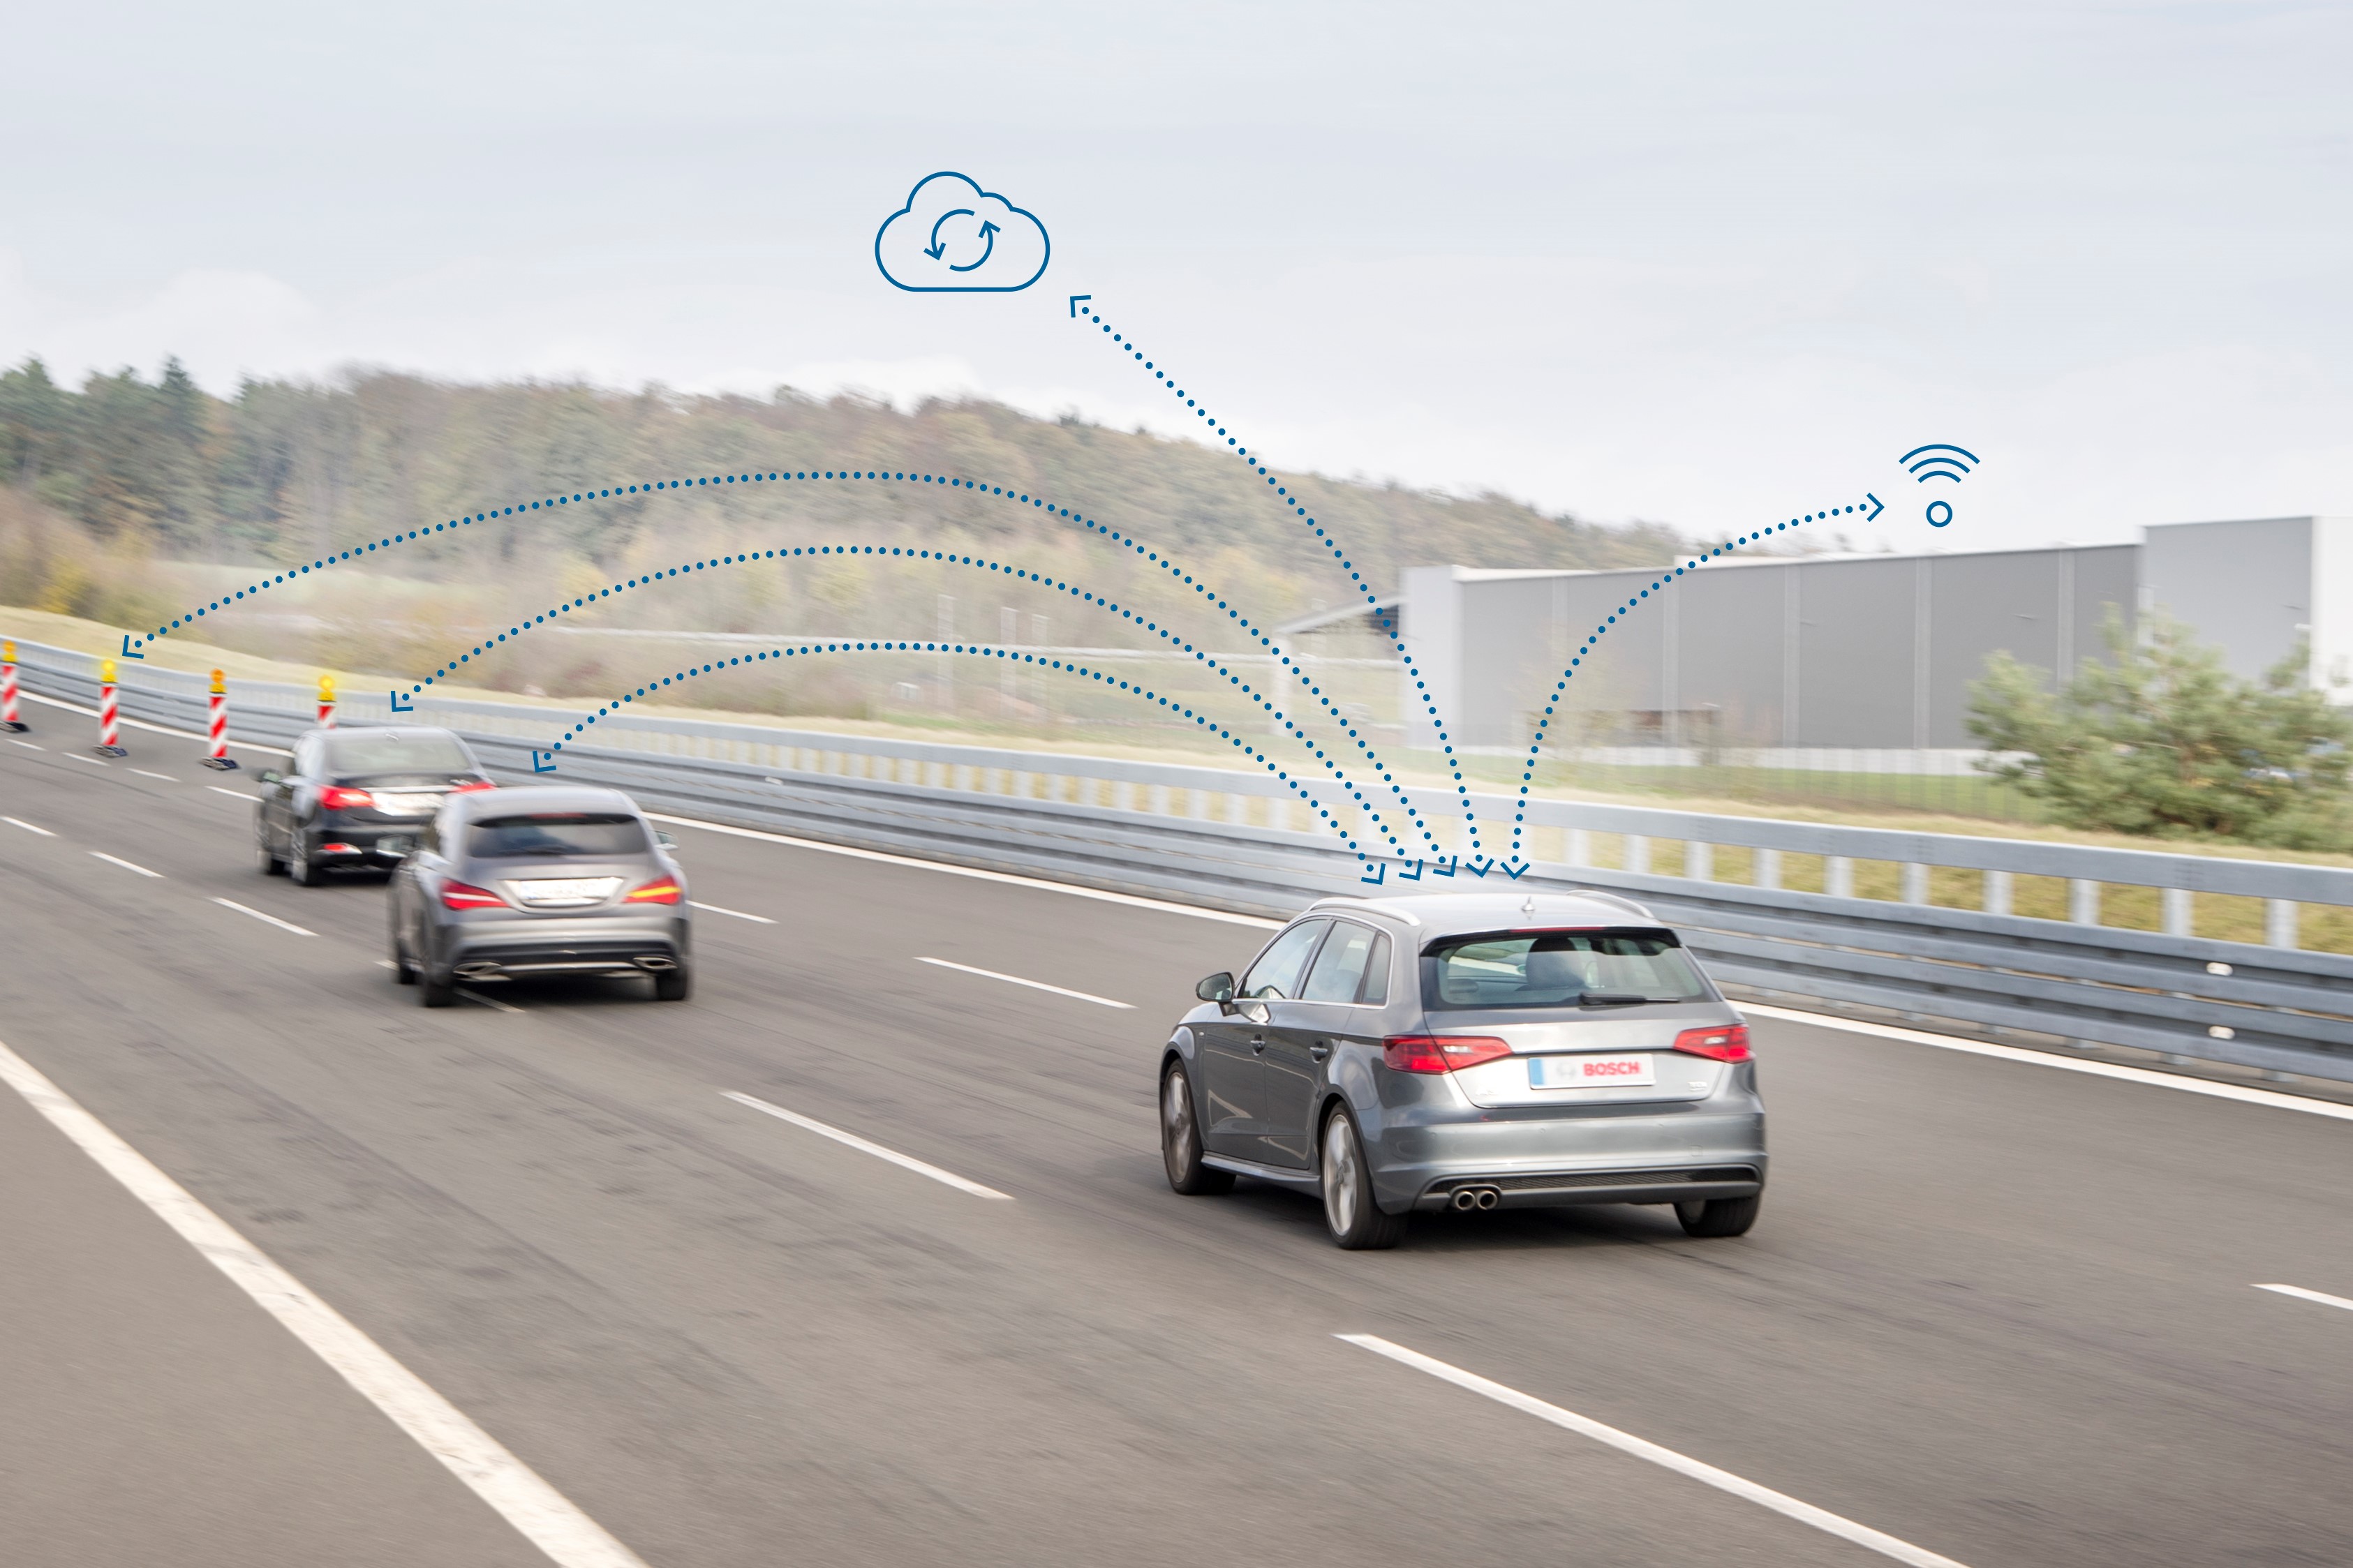 Alerts in critical situations through vehicle-to-x communication from Bosch